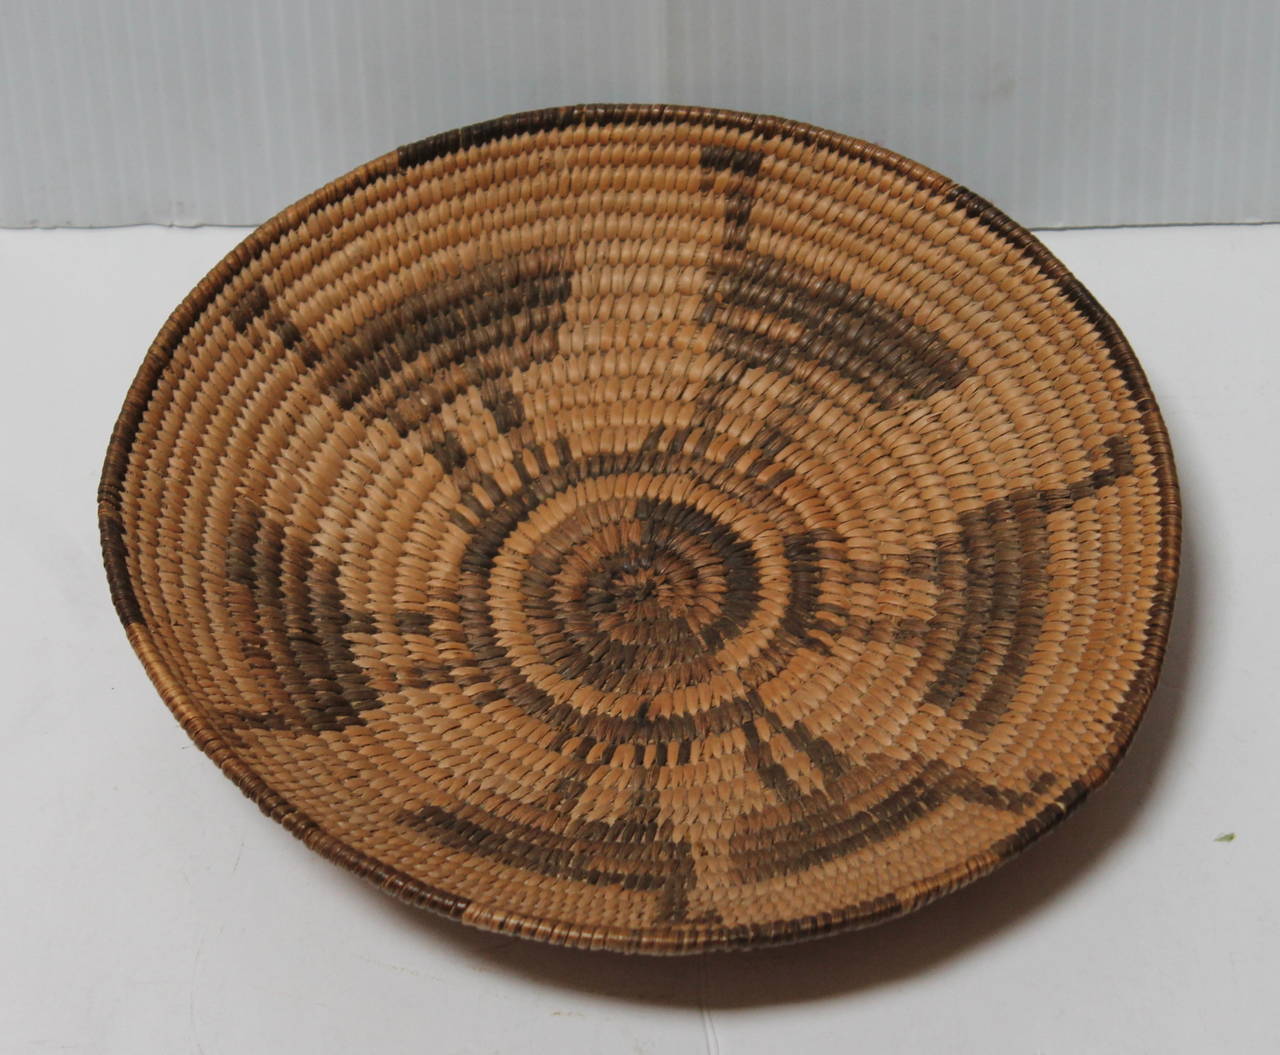 This pictorial basket has a group of road runner birds in a circular motion. The condition is pristine. This is most unusual figural basket for Papago Indians.